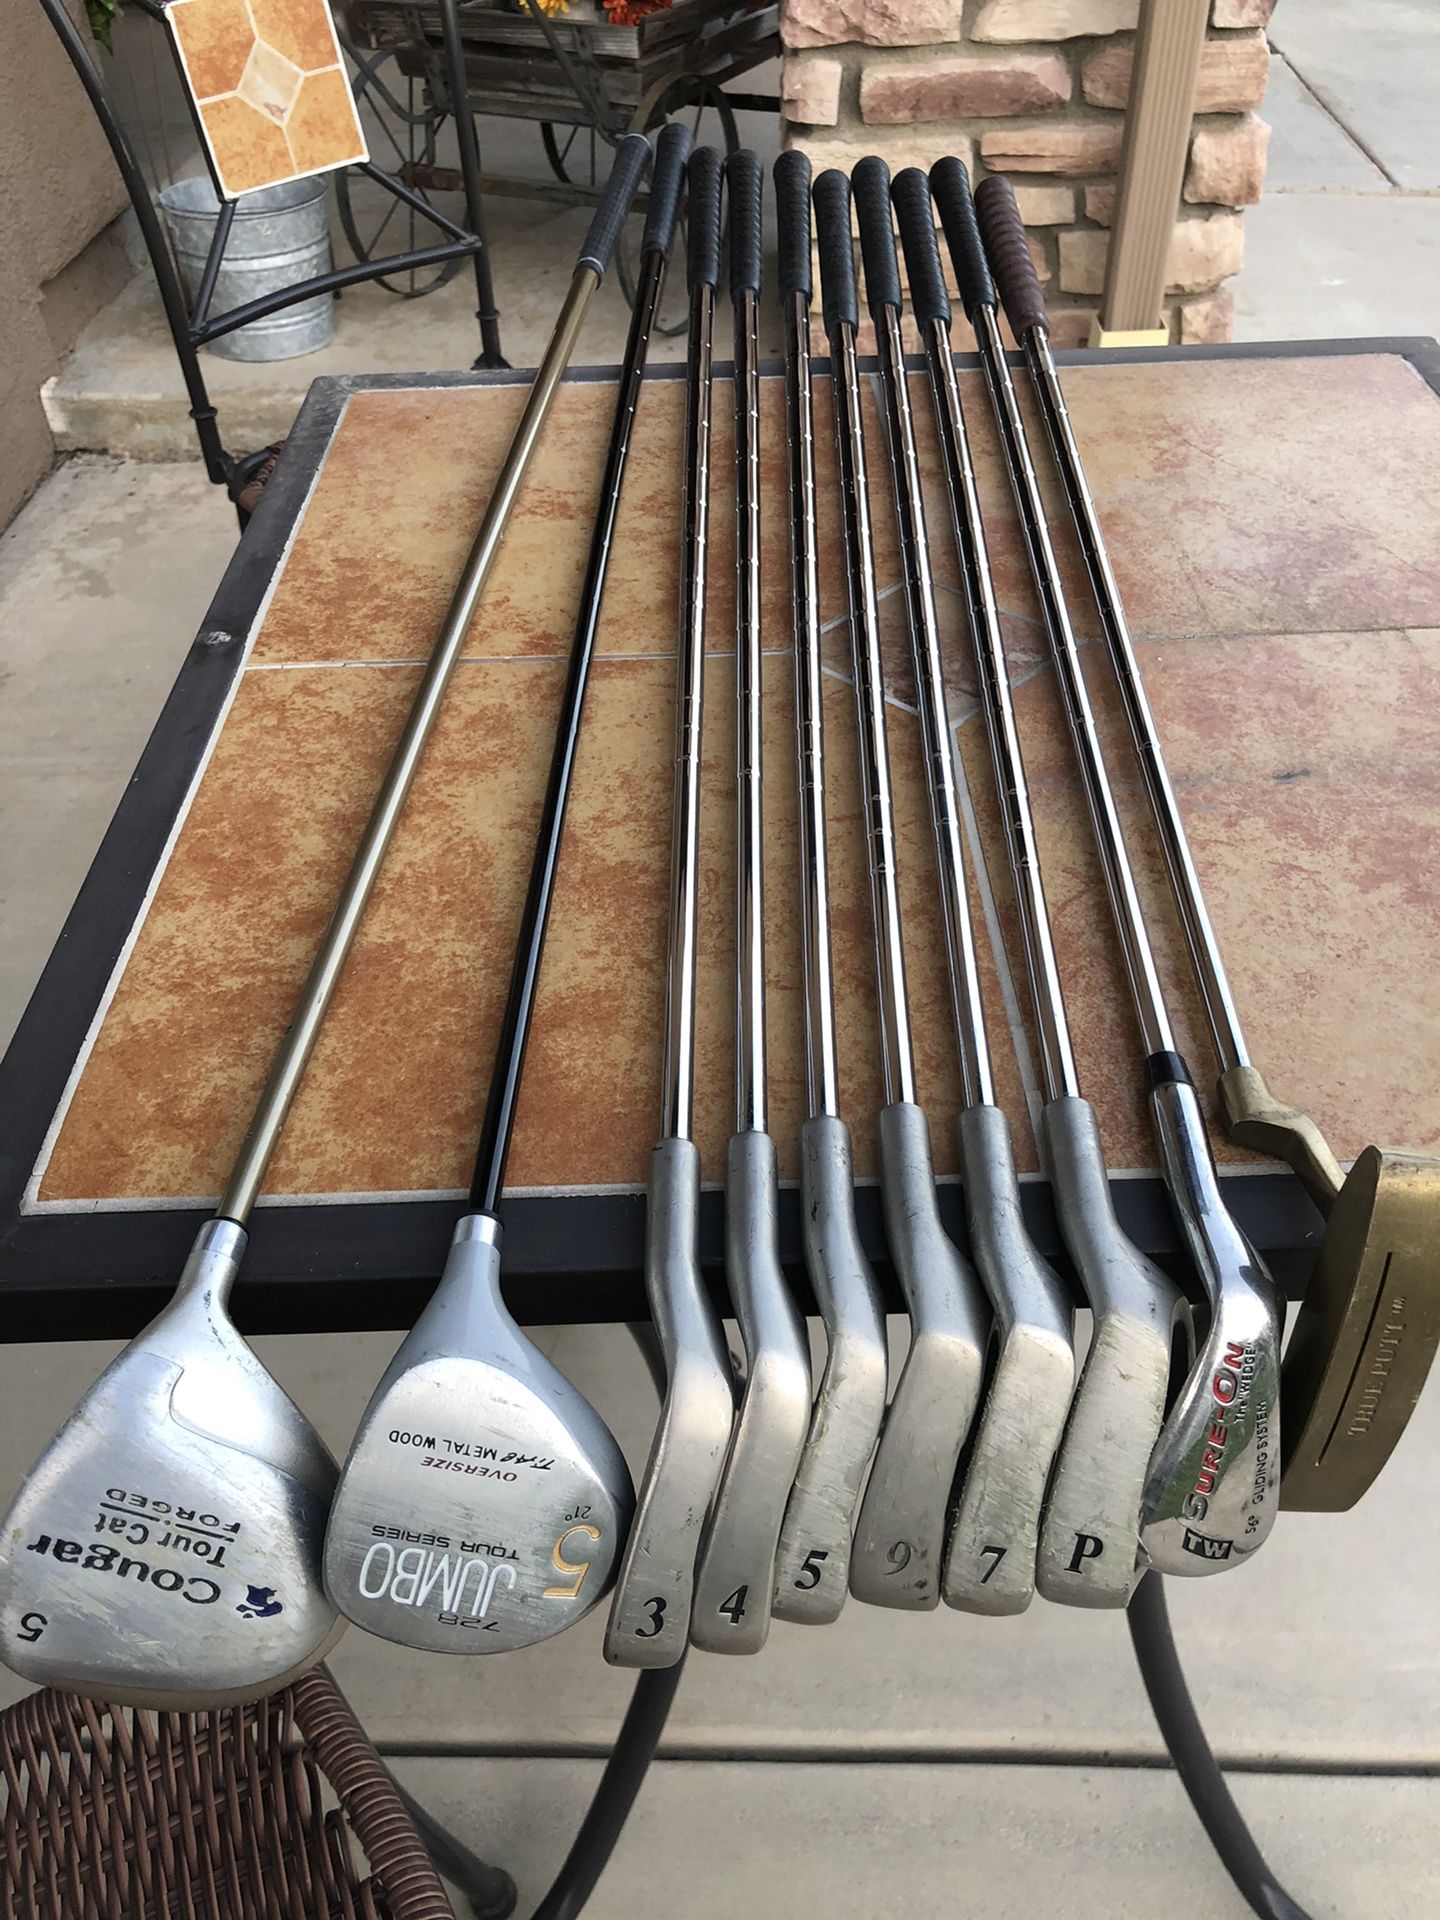 10 righty Golf Clubs $45 ! Irons drivers Putter TW wedge